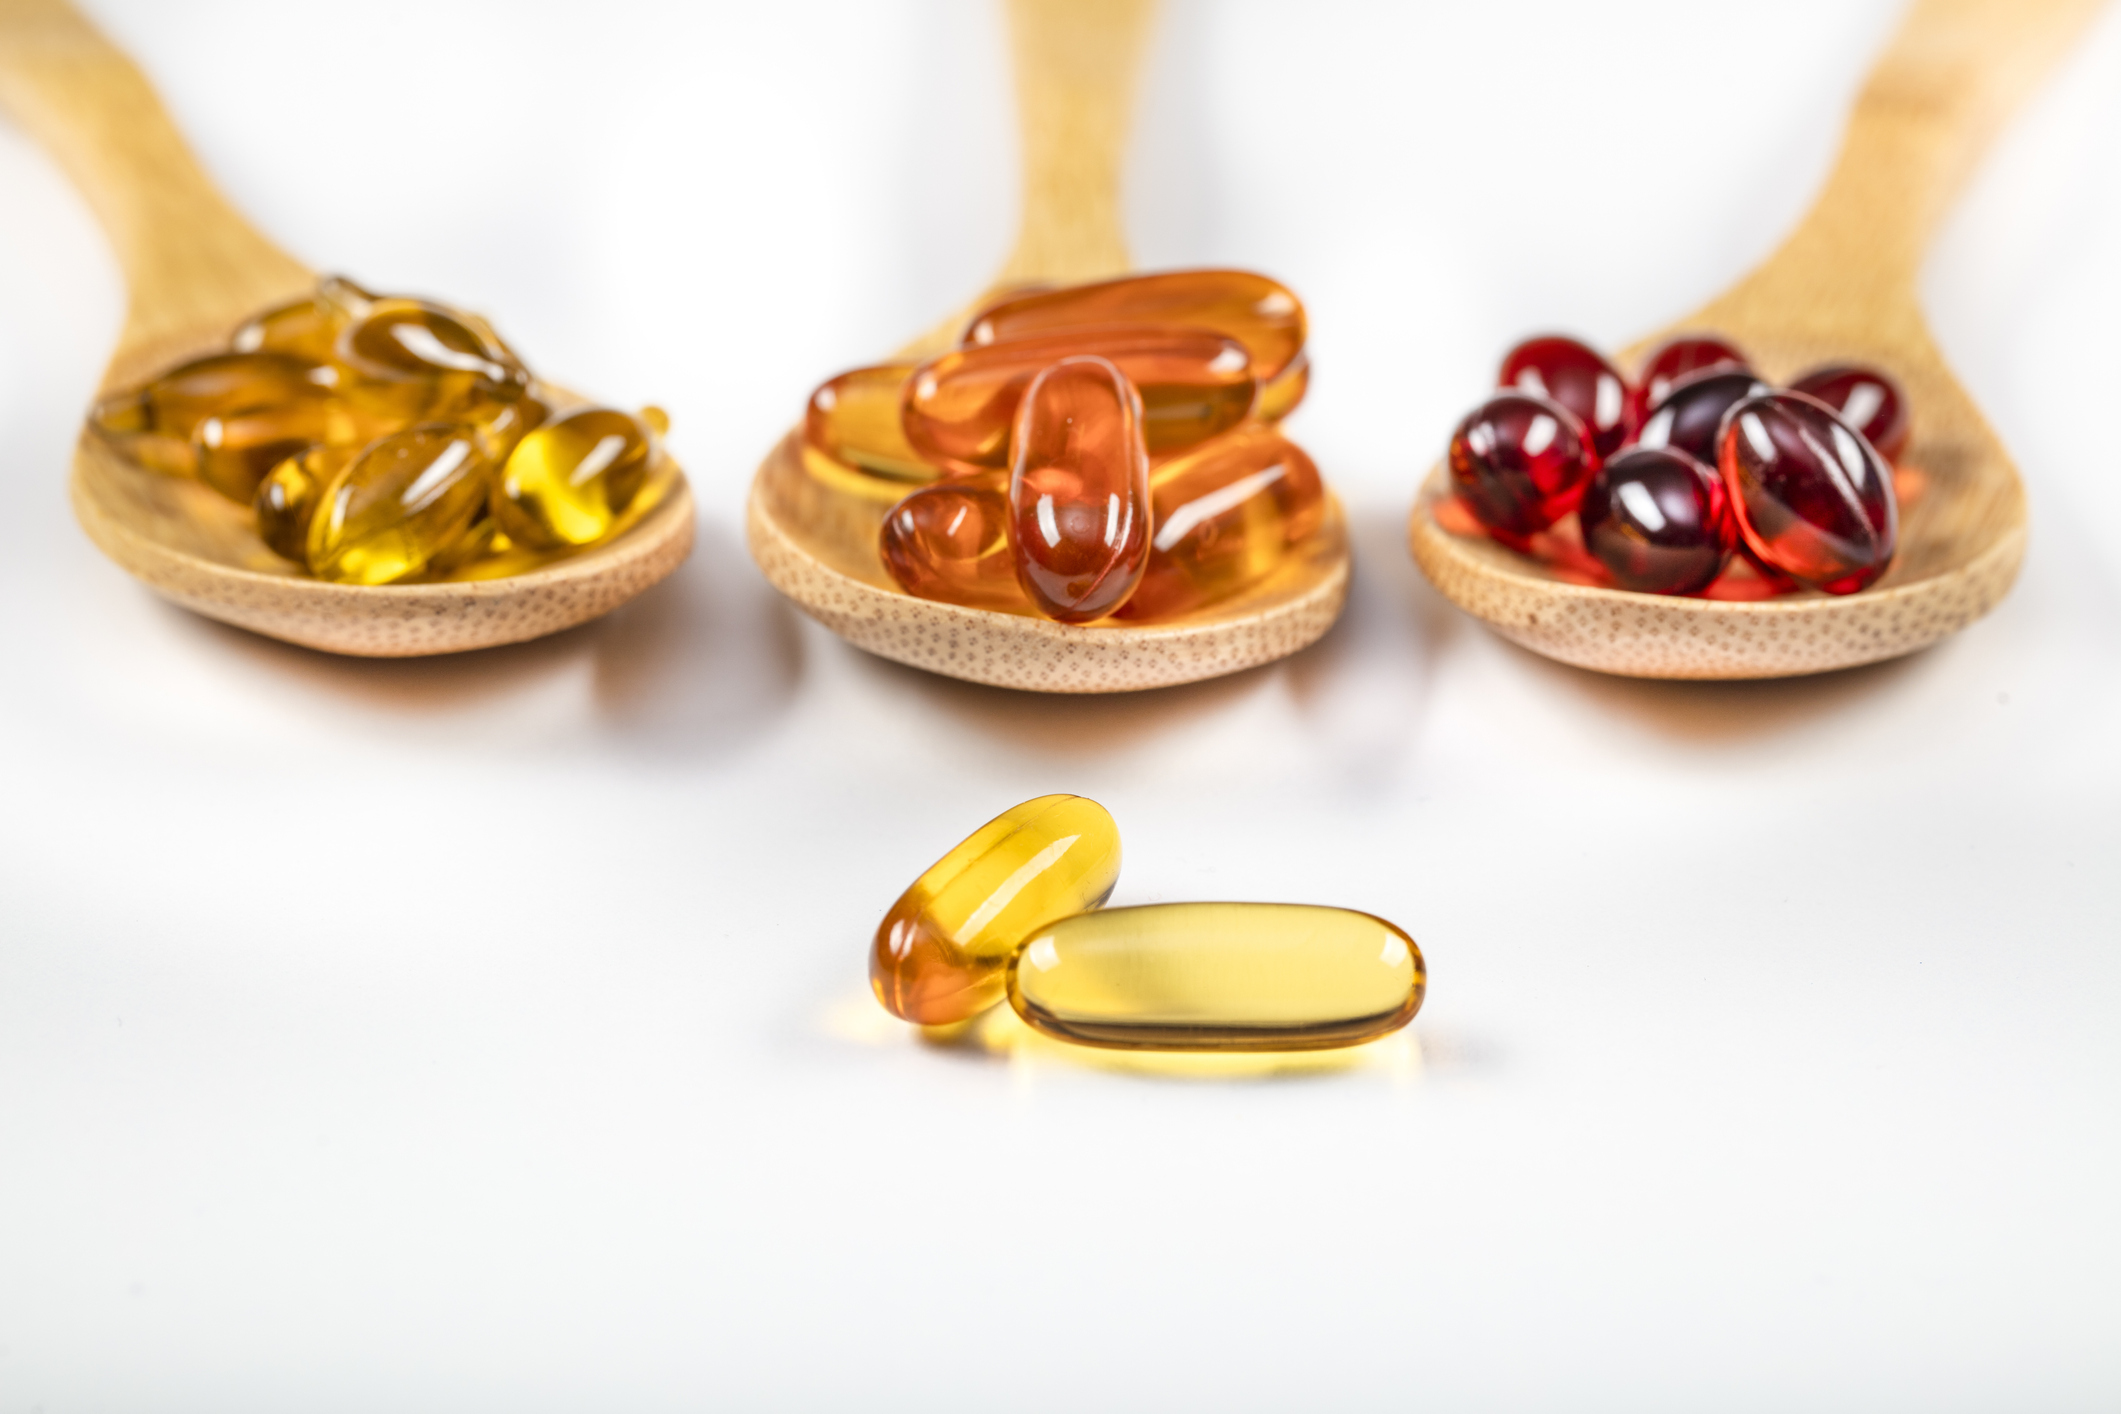 SHOULD WE USE FISH OIL SUPPLEMENT OR KRILL OIL?